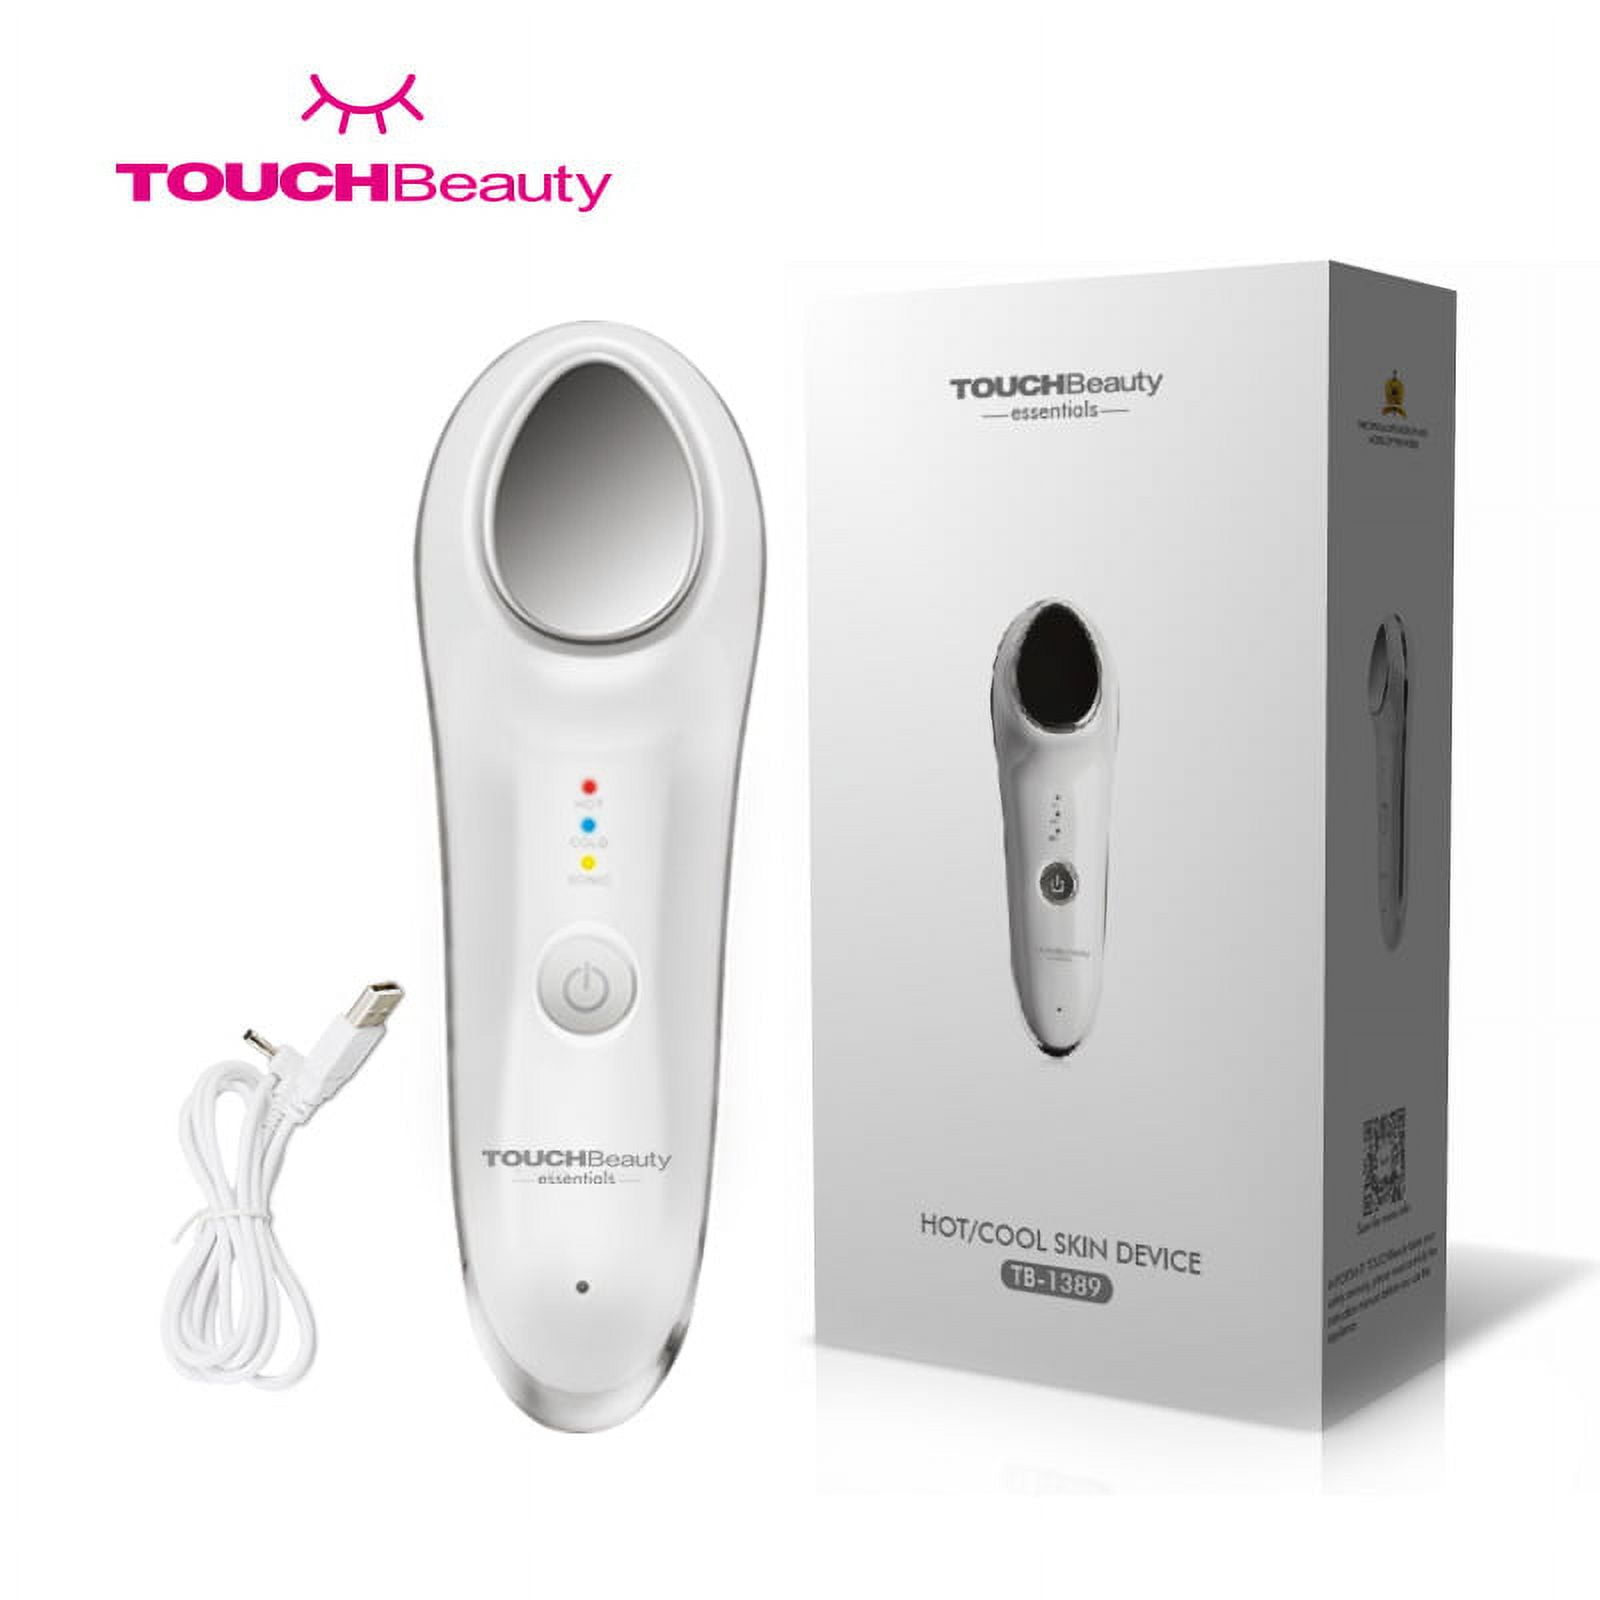 Hot Fashions Elegant Cool Beauty Home Massager & TB-1389 Touch